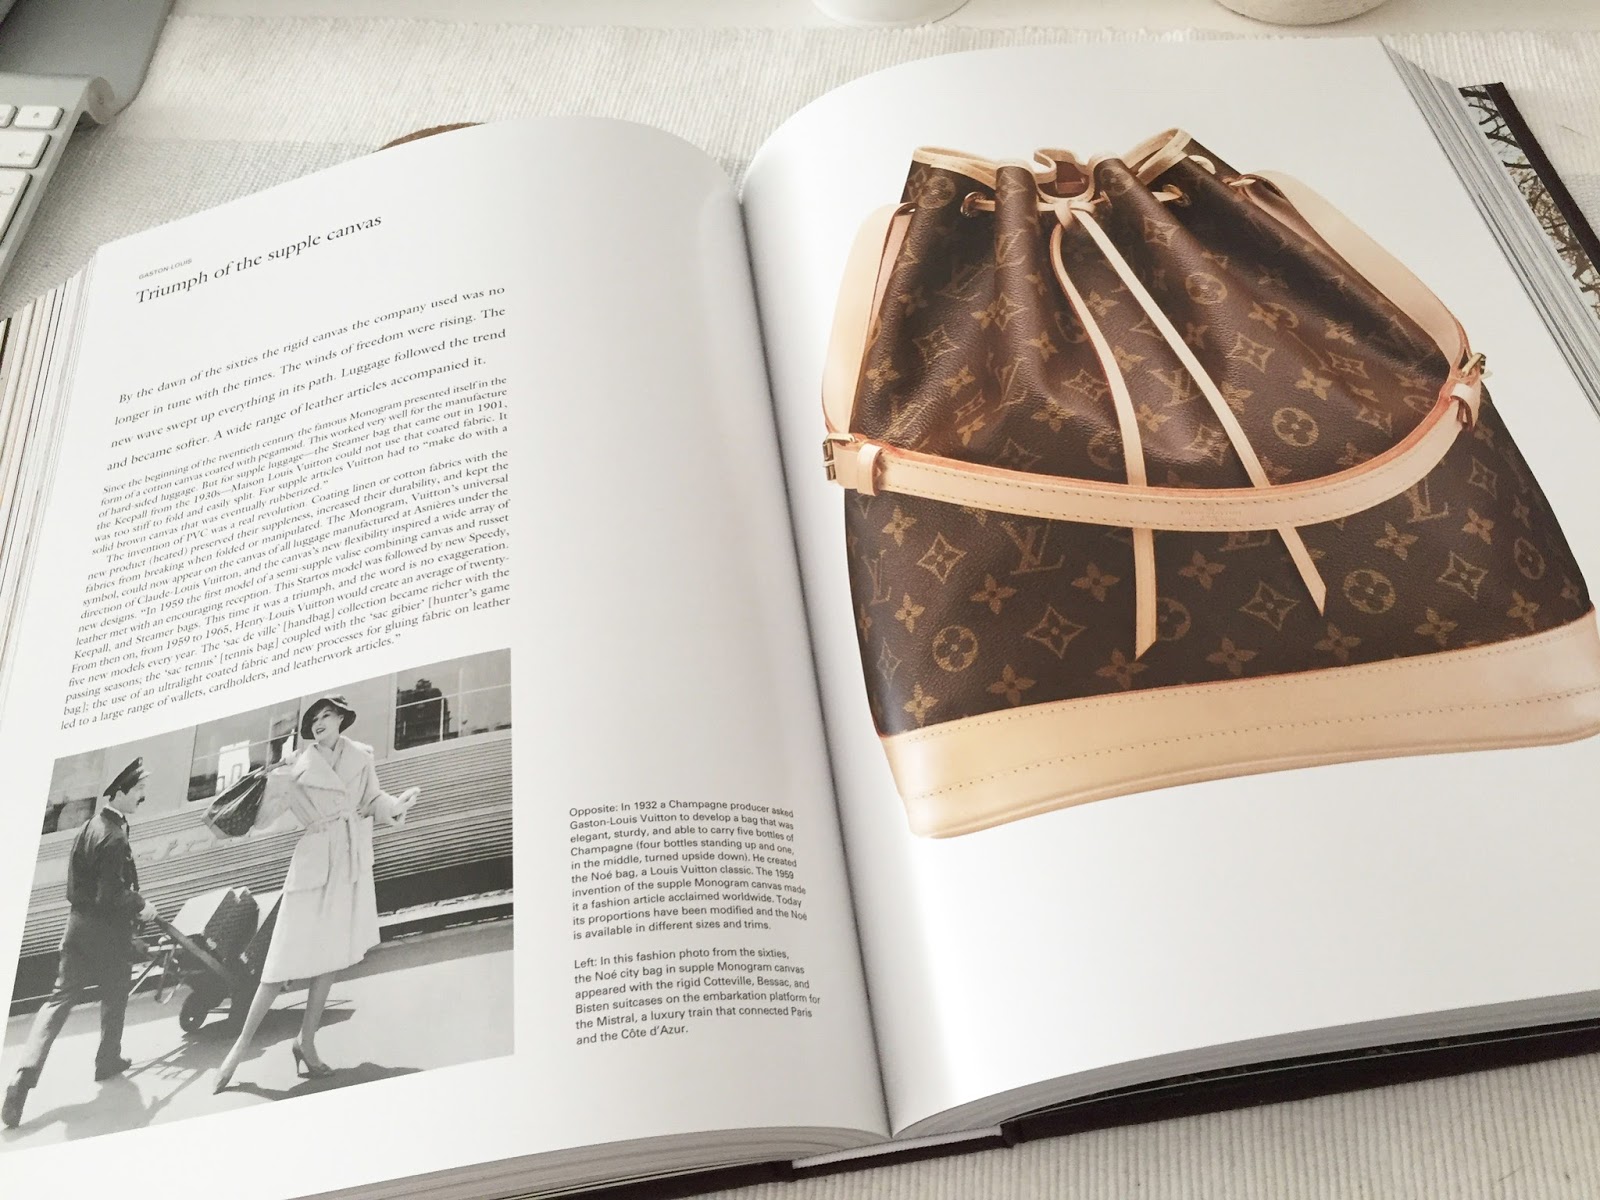 Graphic Image Little Book of Louis Vuitton - Ivory